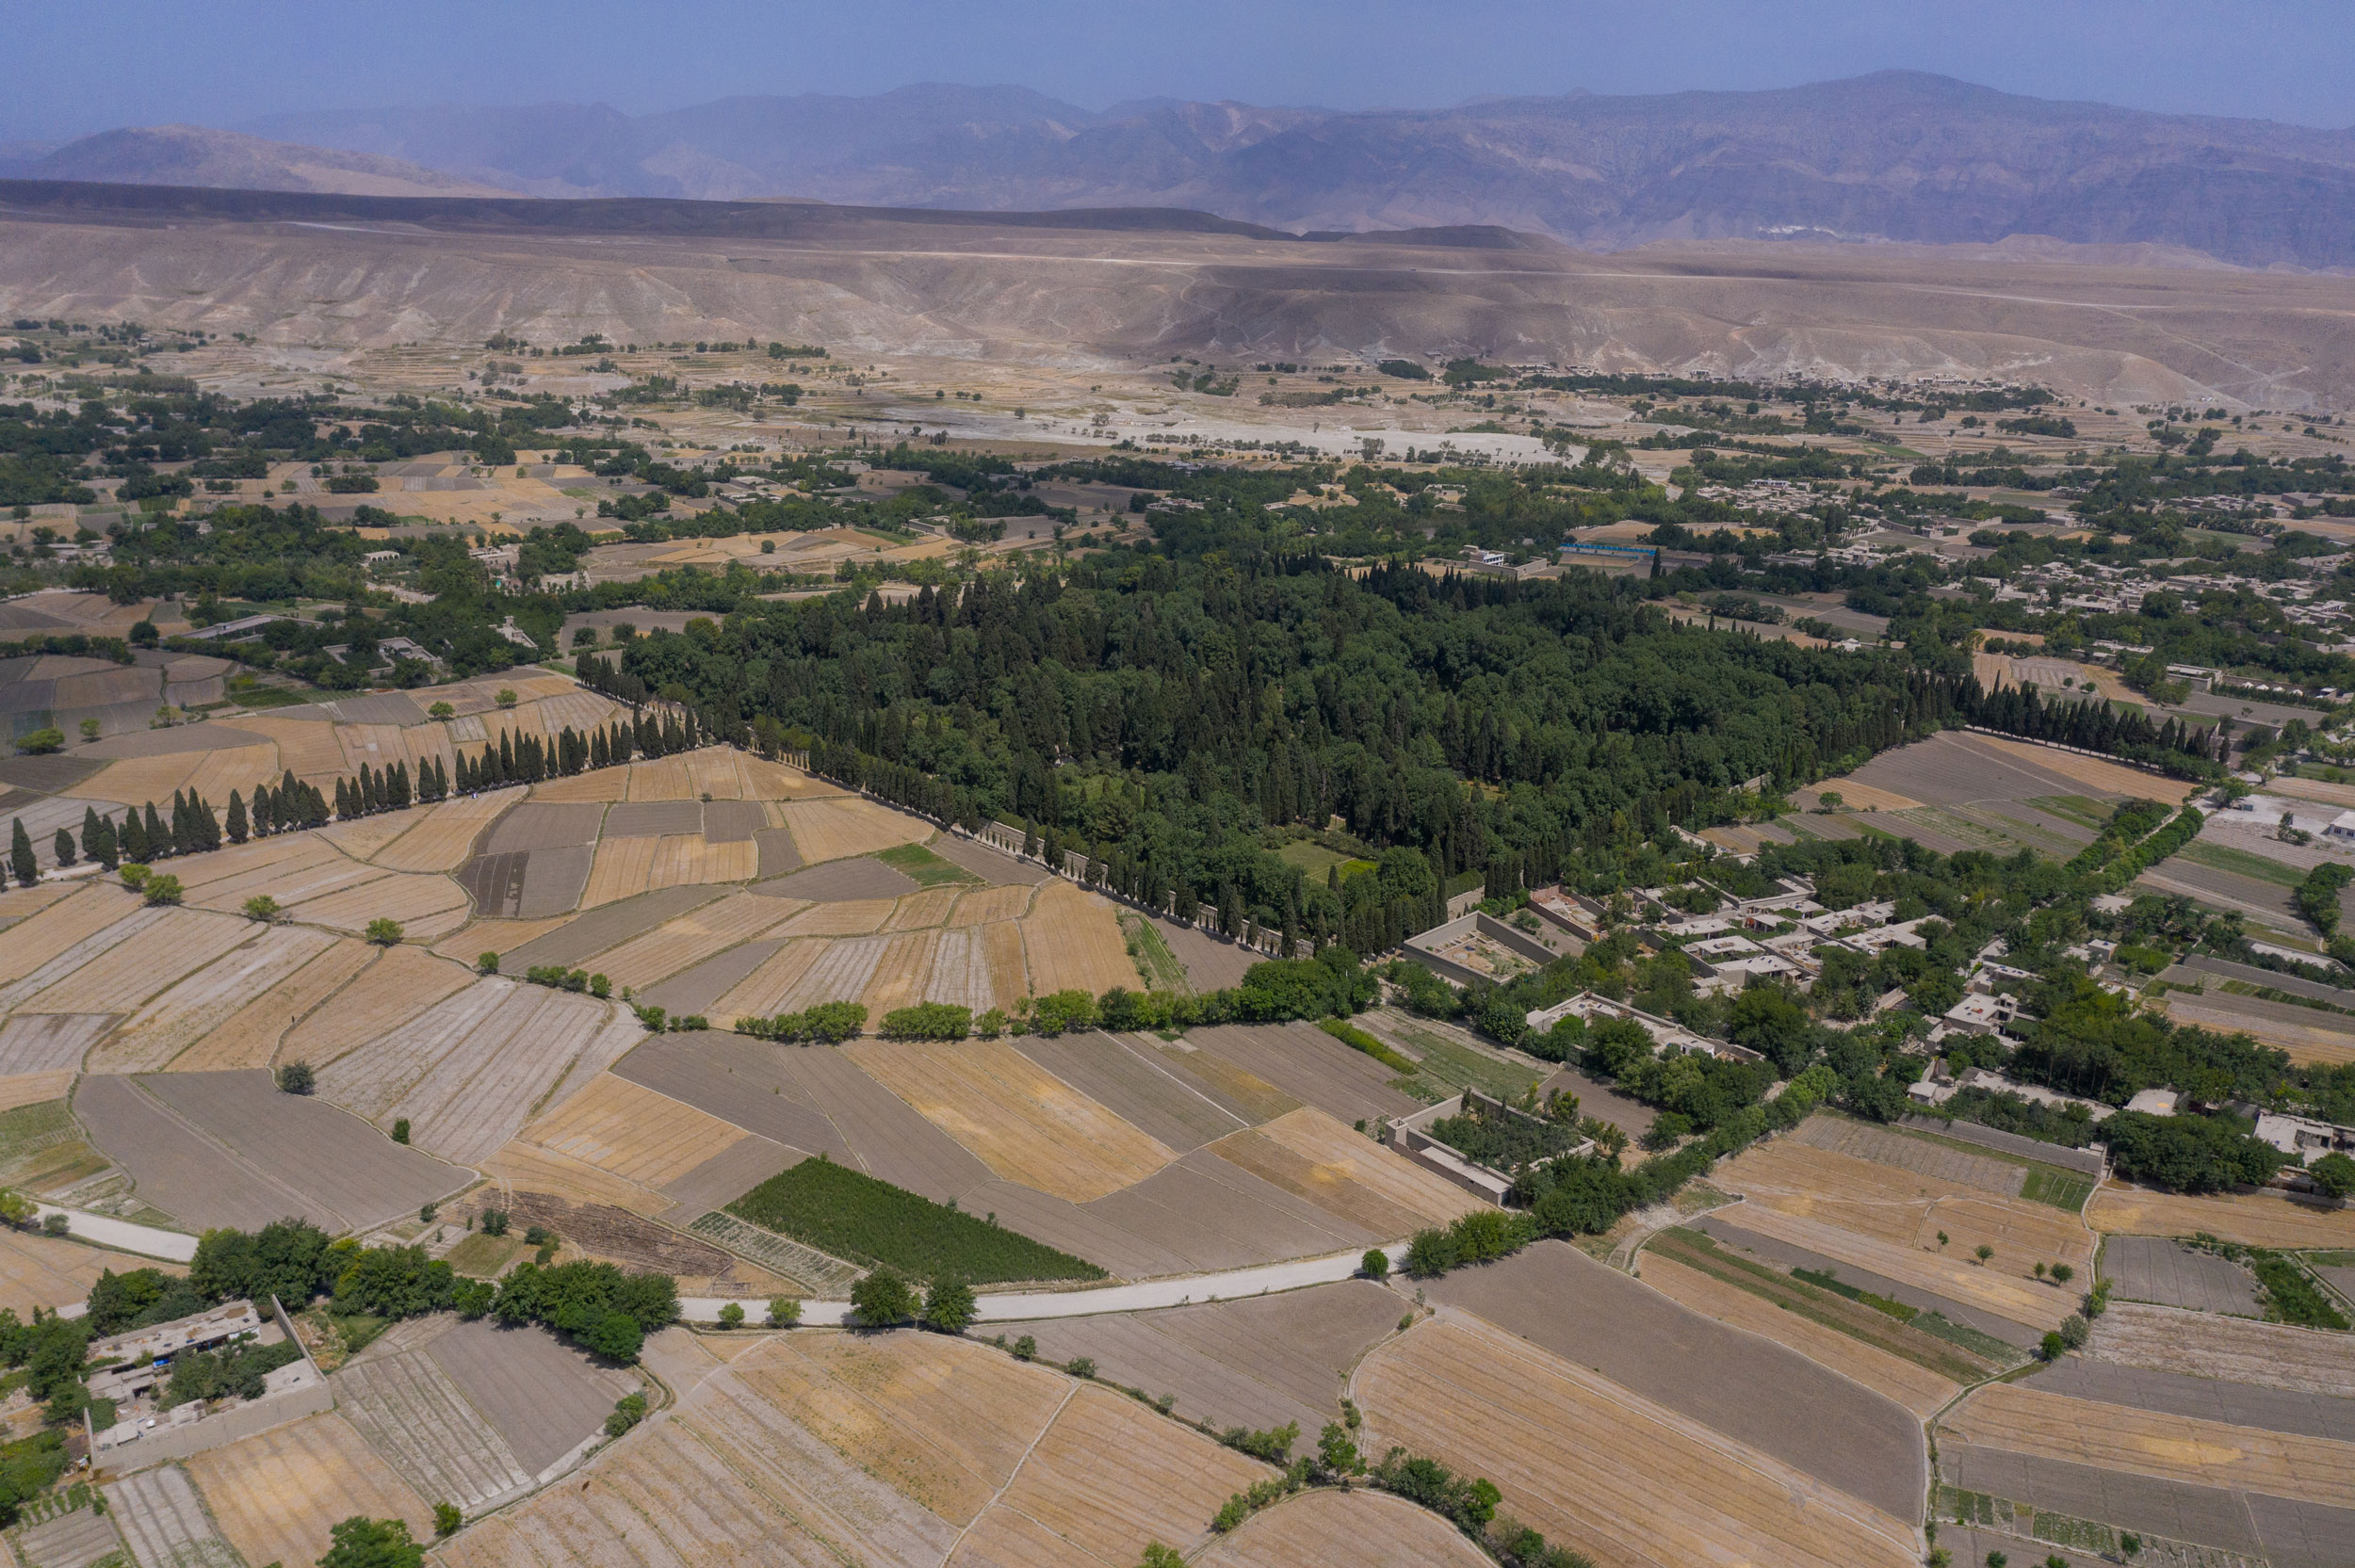 <p>Drone capture showing the garden and surrounding agricultural fields</p>